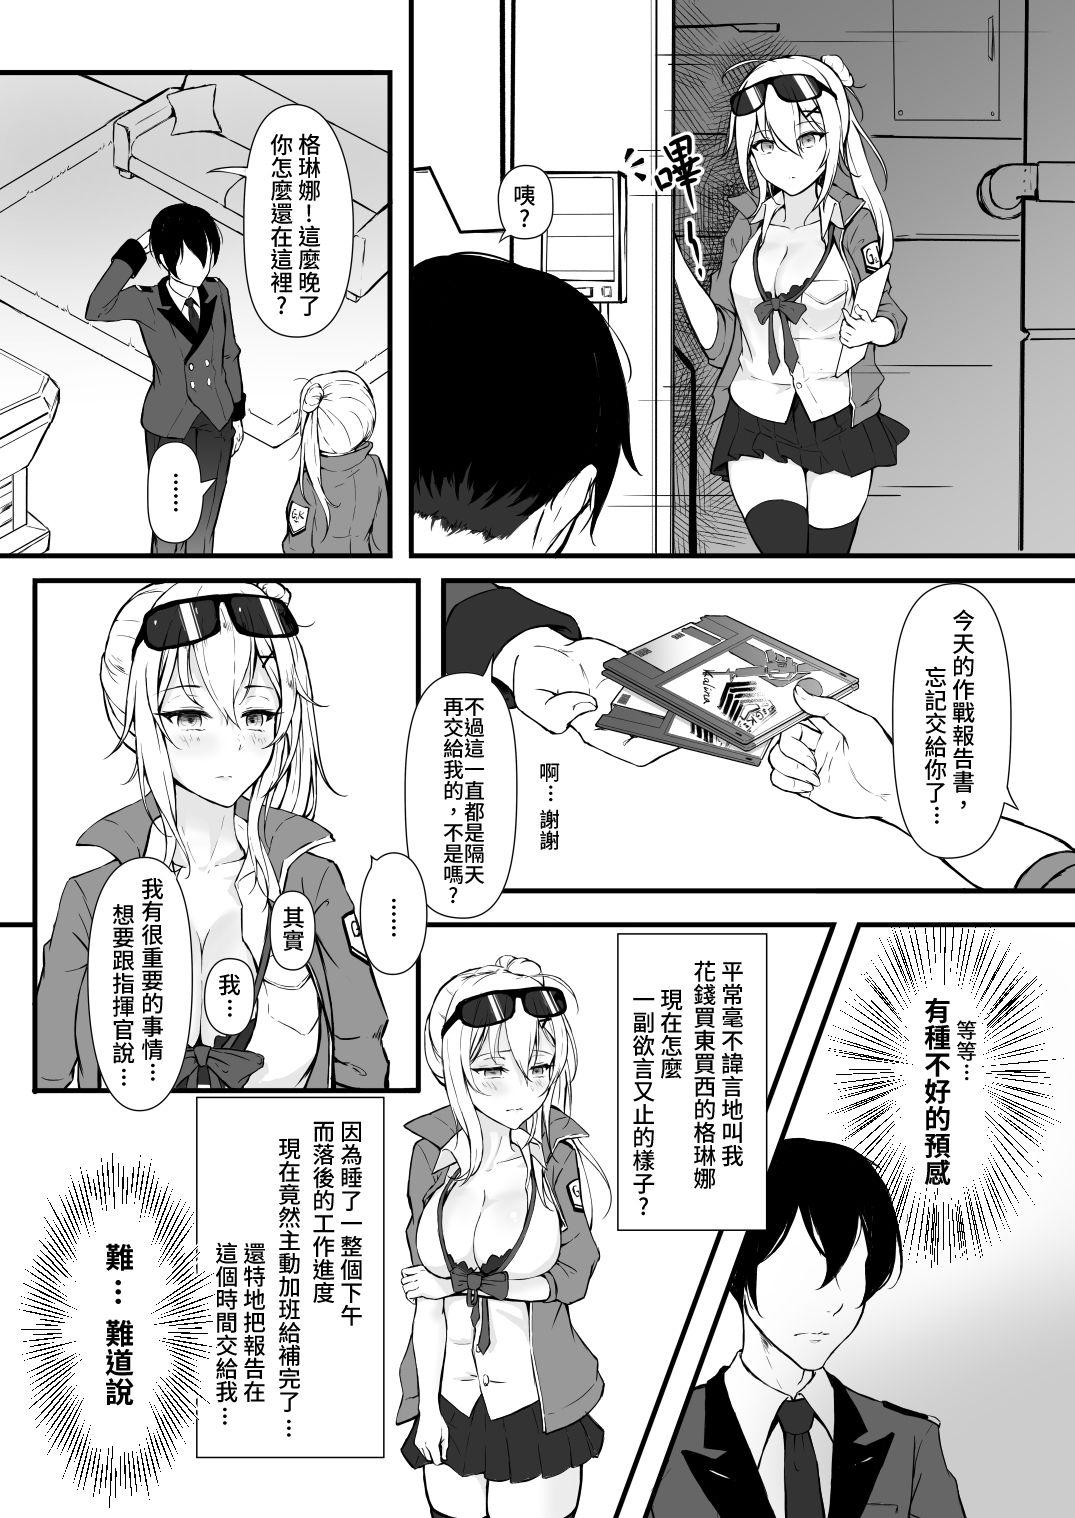 Naked Women Fucking How Many Diamonds a Kiss Worth? - Girls frontline Shot - Page 7